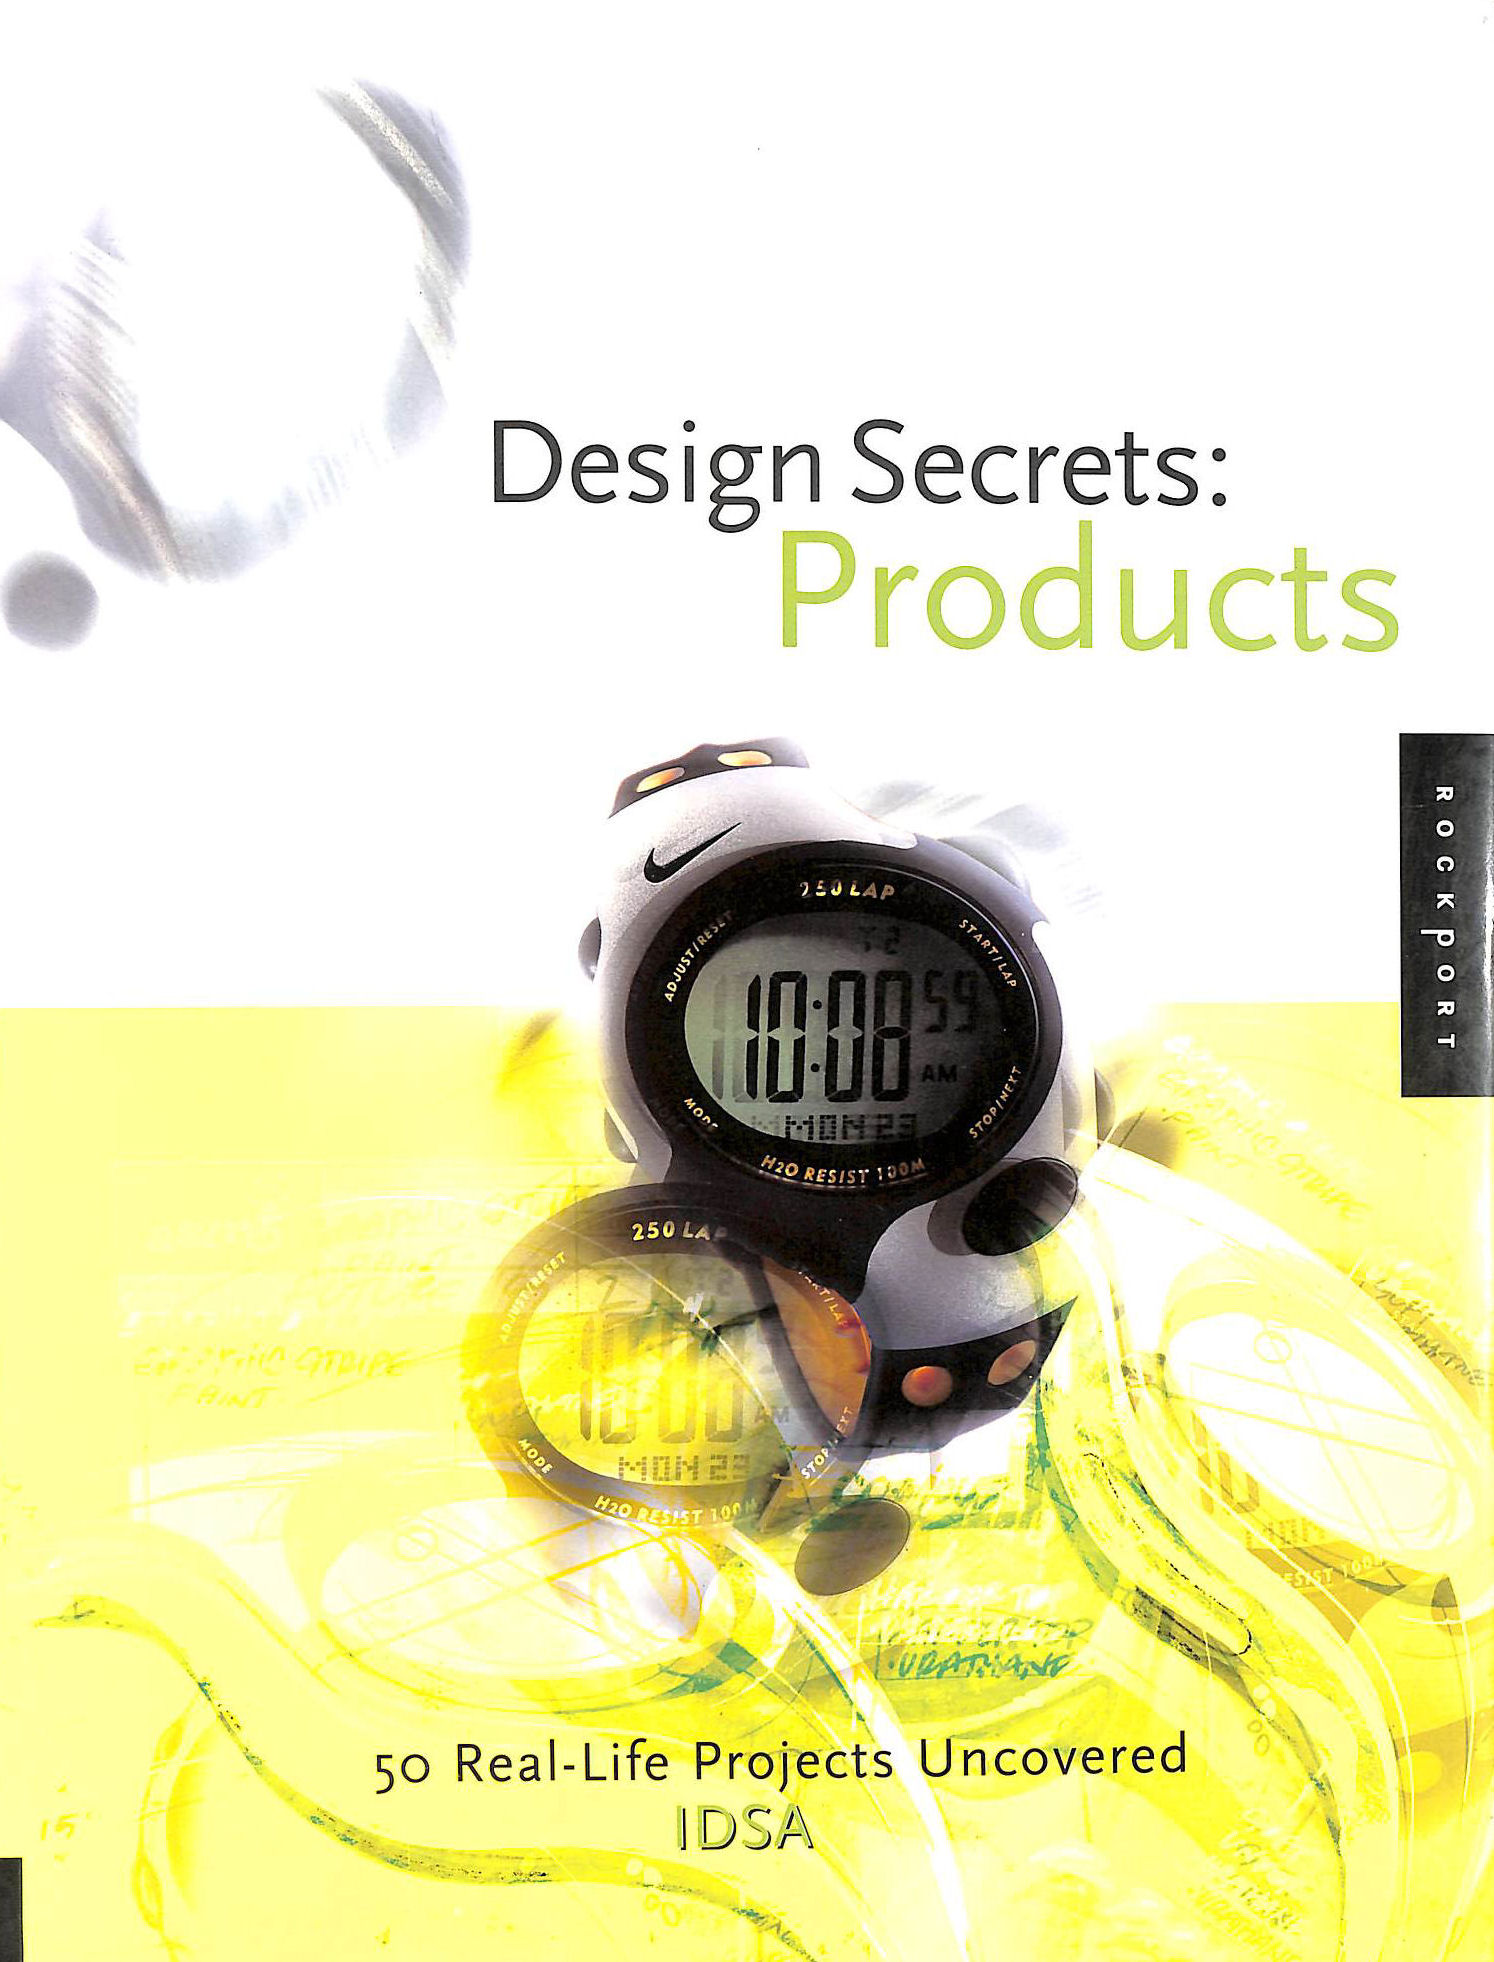 INDUSTRIAL DESIGNERS SOCIETY OF AMERICA - Design Secrets: Products: 50 Real-Life Projects Uncovered